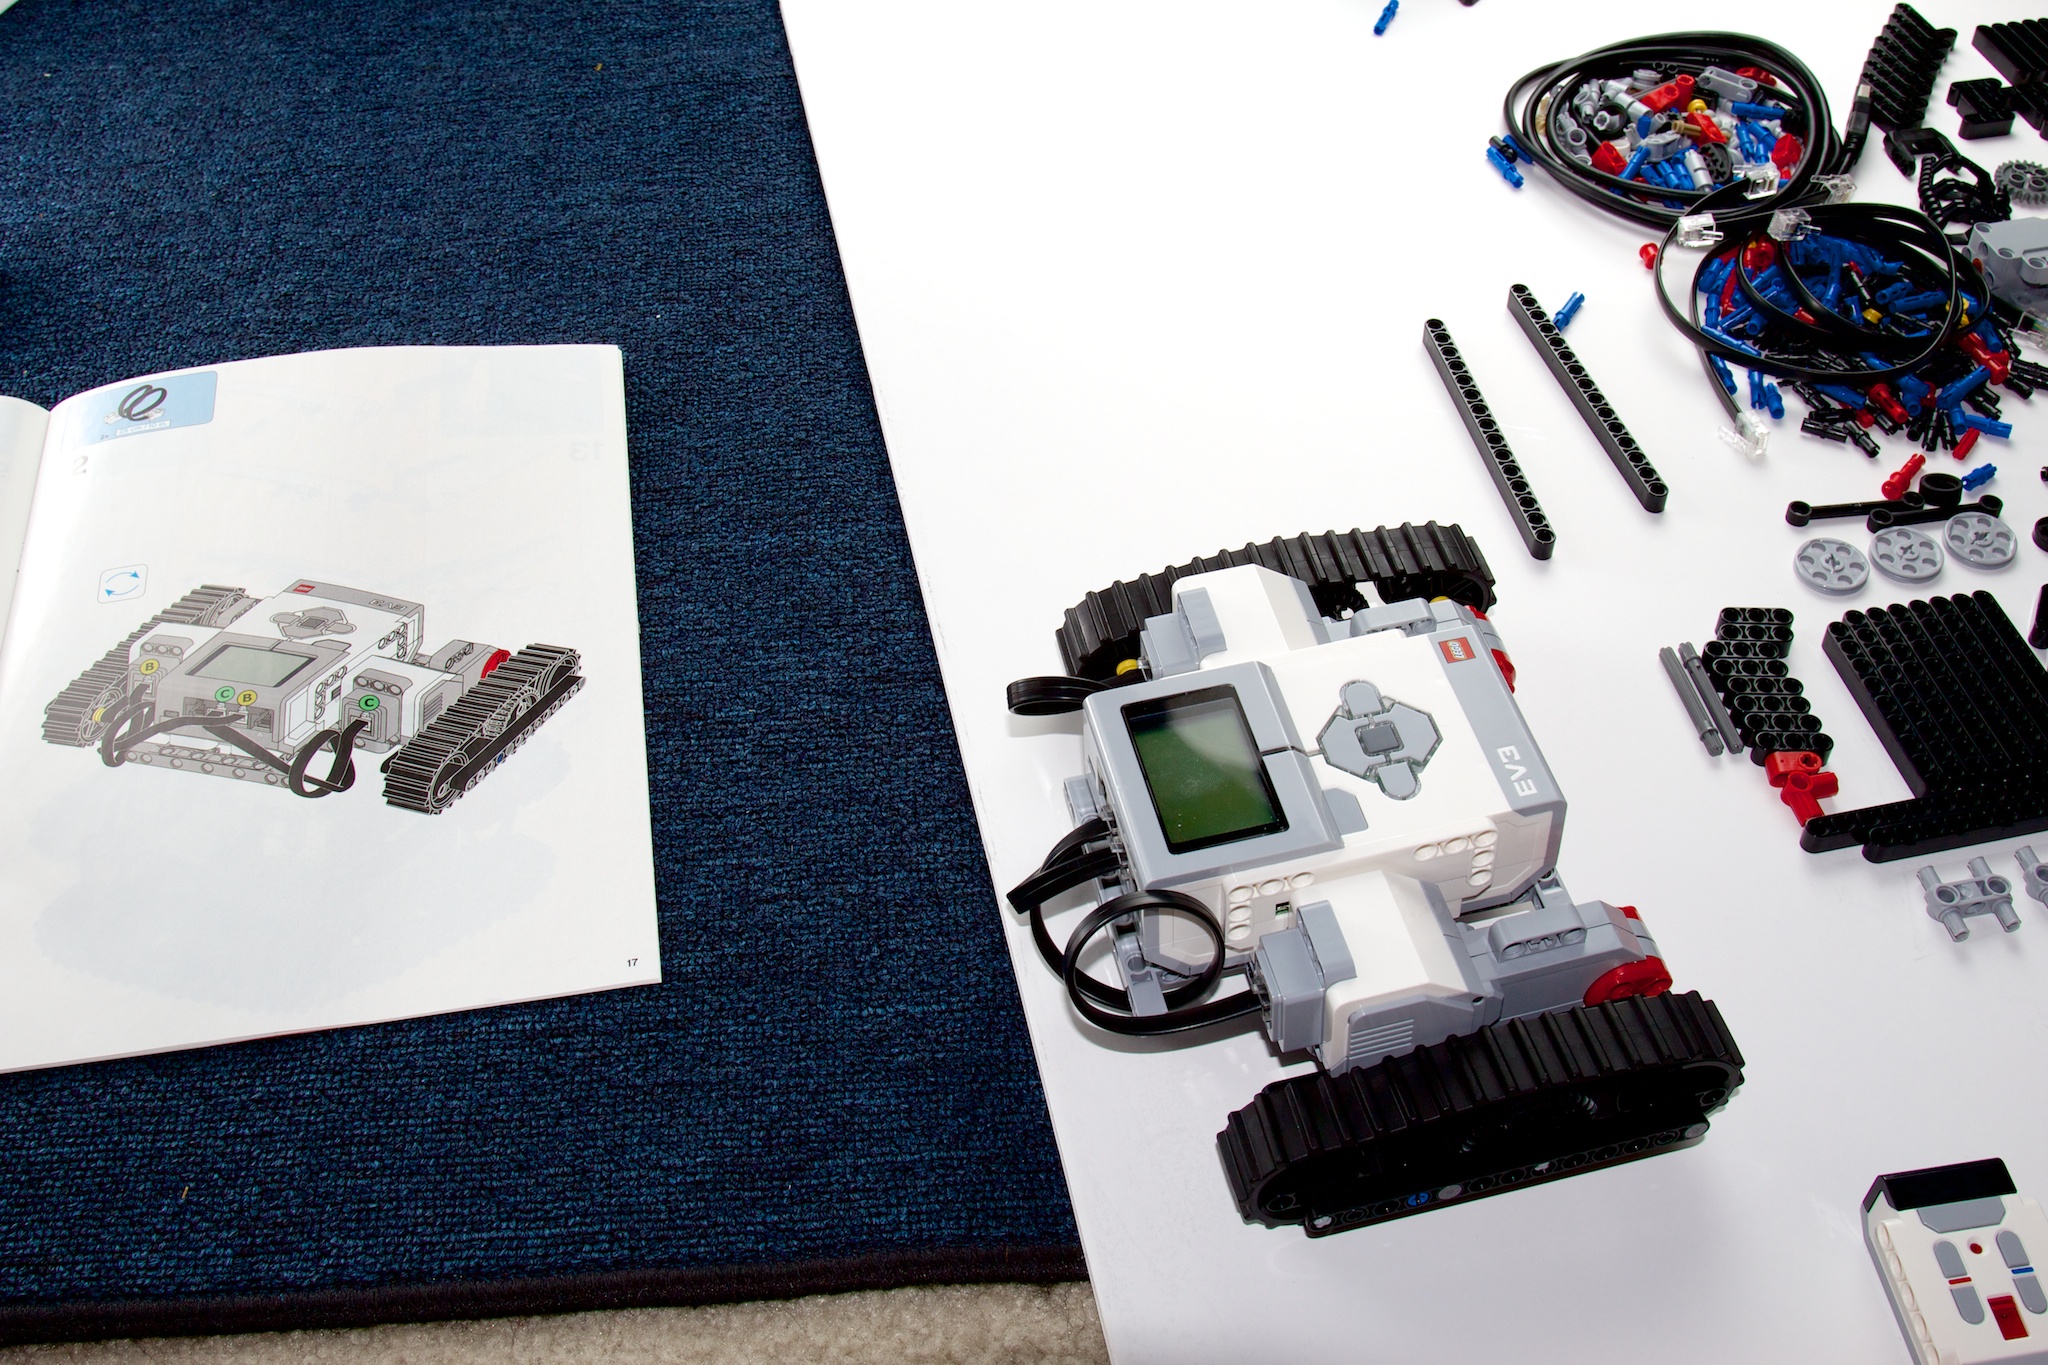 Review: Mindstorms EV3 means giant robots, powerful computers | Ars Technica